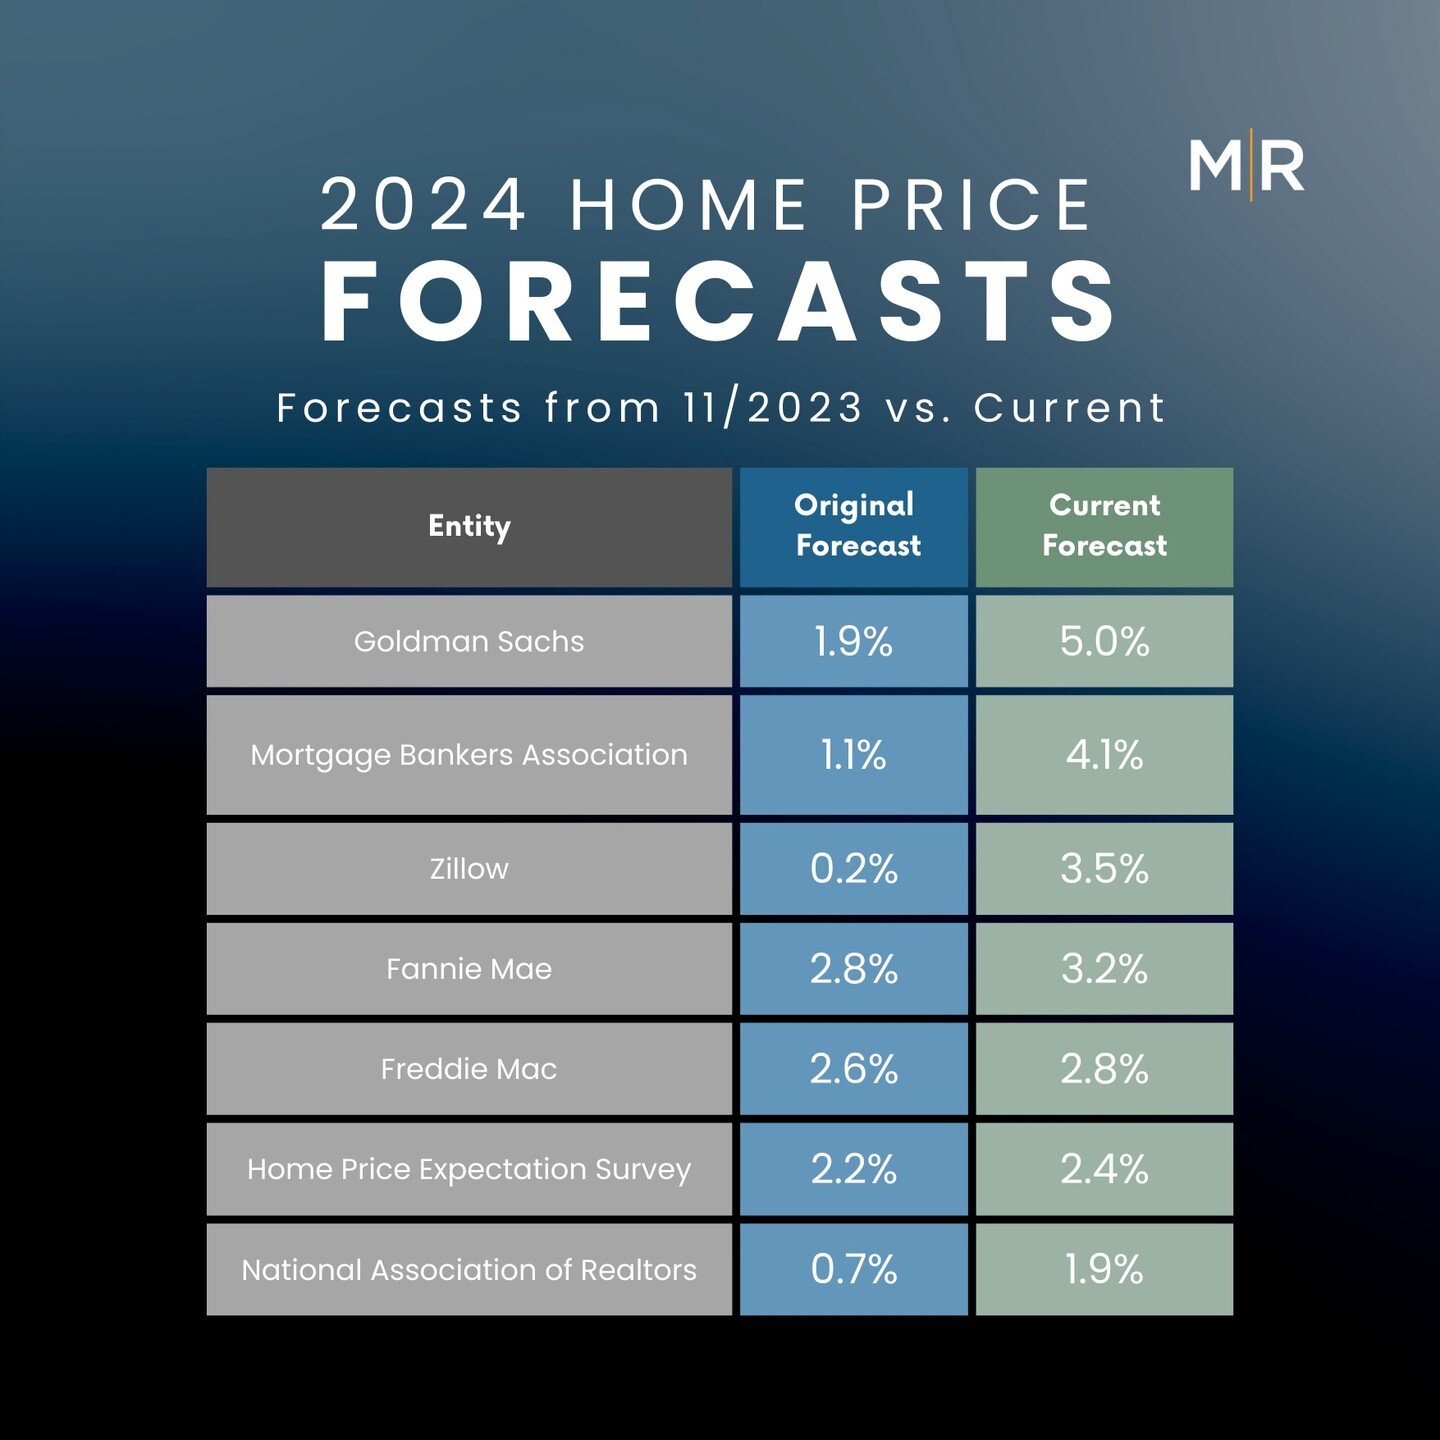 Over the past few months, experts have revised their 2024 home price forecasts based on the latest data and market signals. And now, they&rsquo;re even more confident prices will rise, not fall. 

If you&rsquo;re curious about what that means for pri